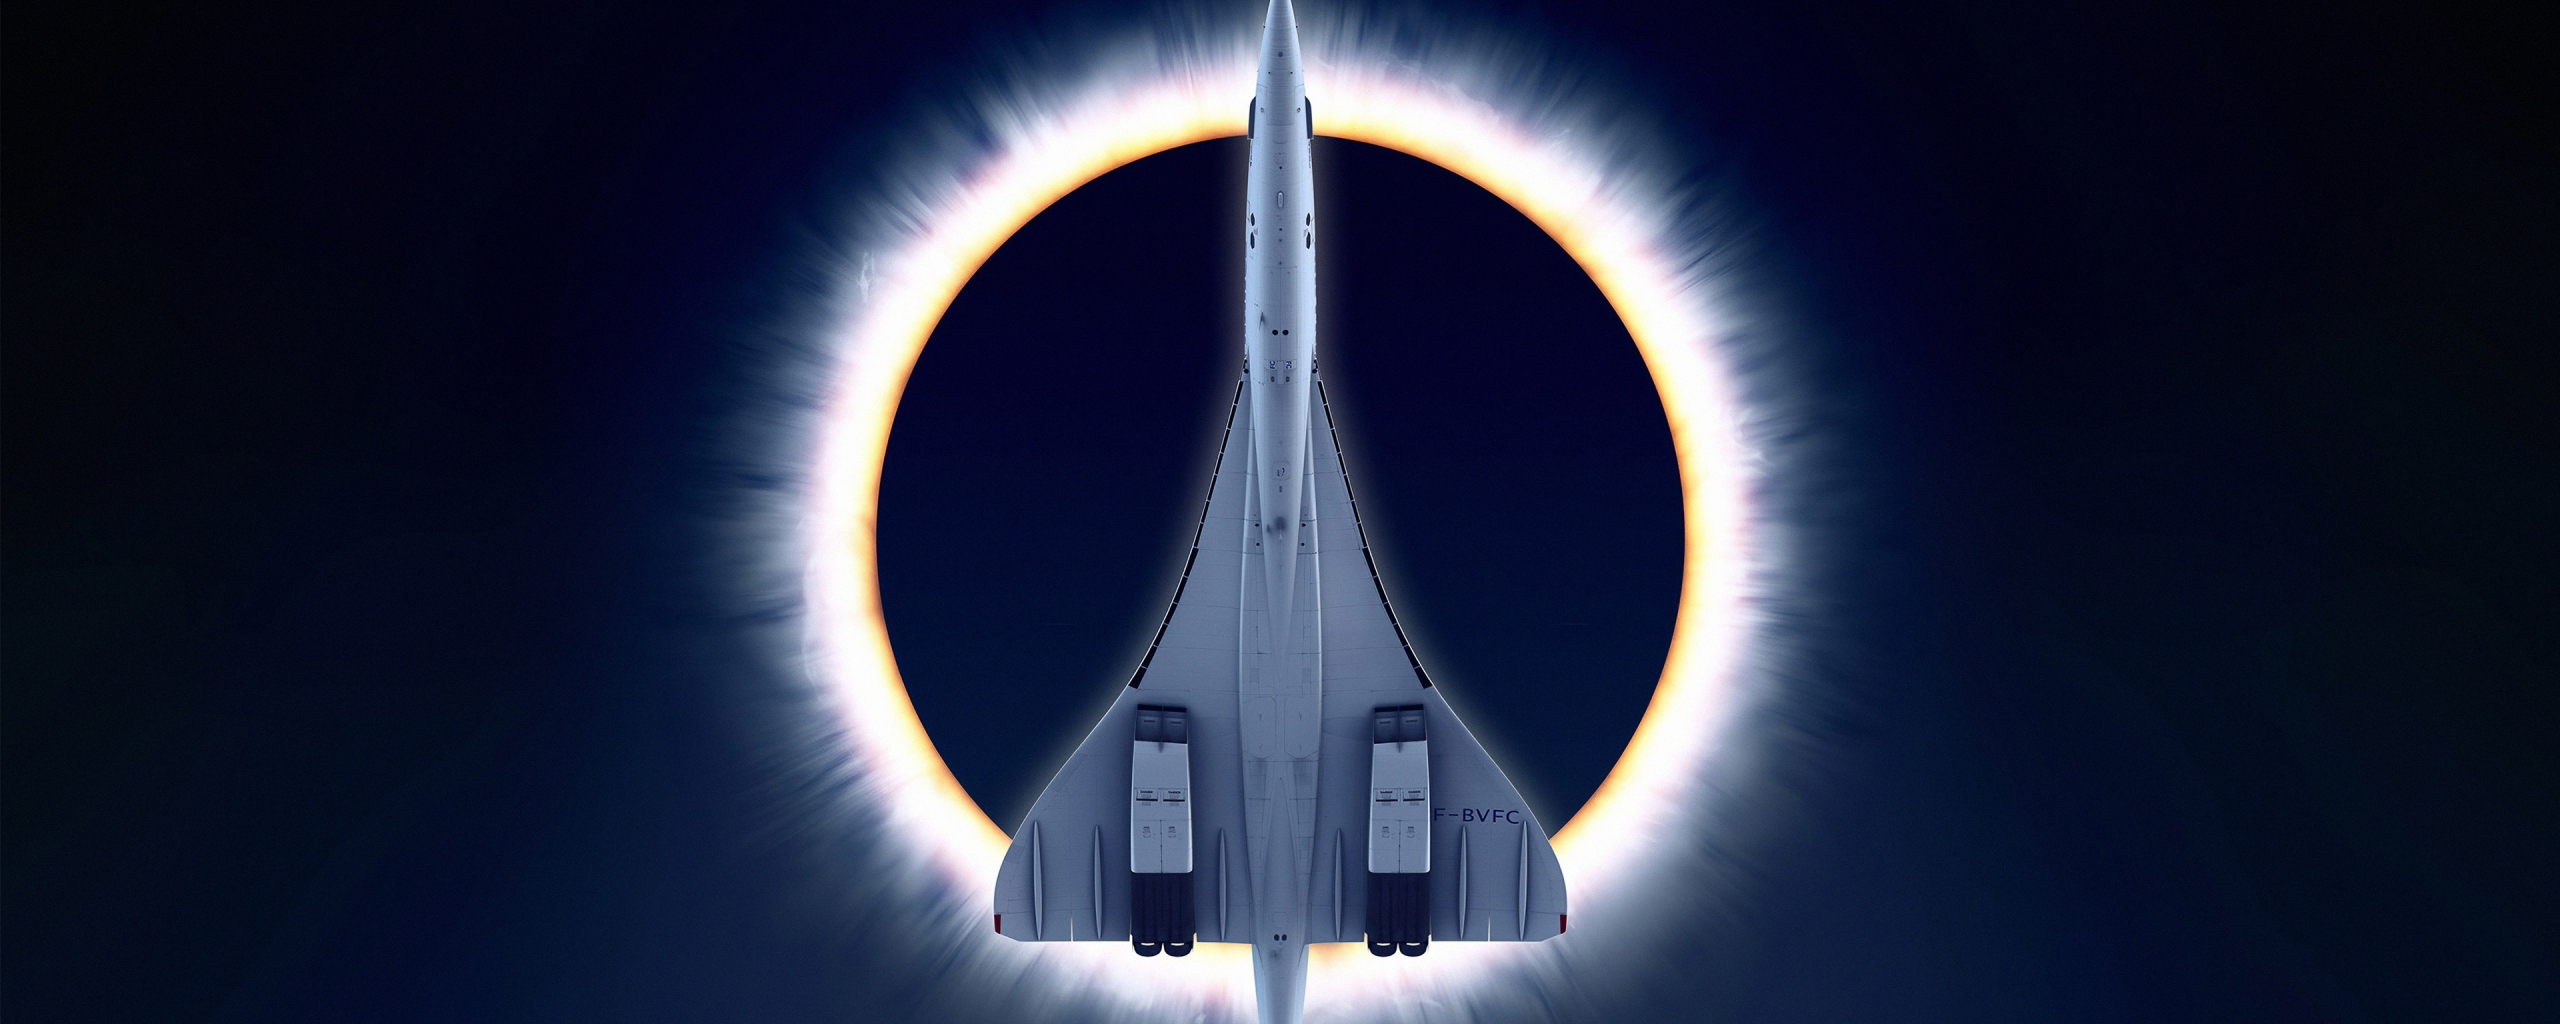 Concorde Carre, eclipse, airplane, moon, aircraft, 2560x1024 wallpaper